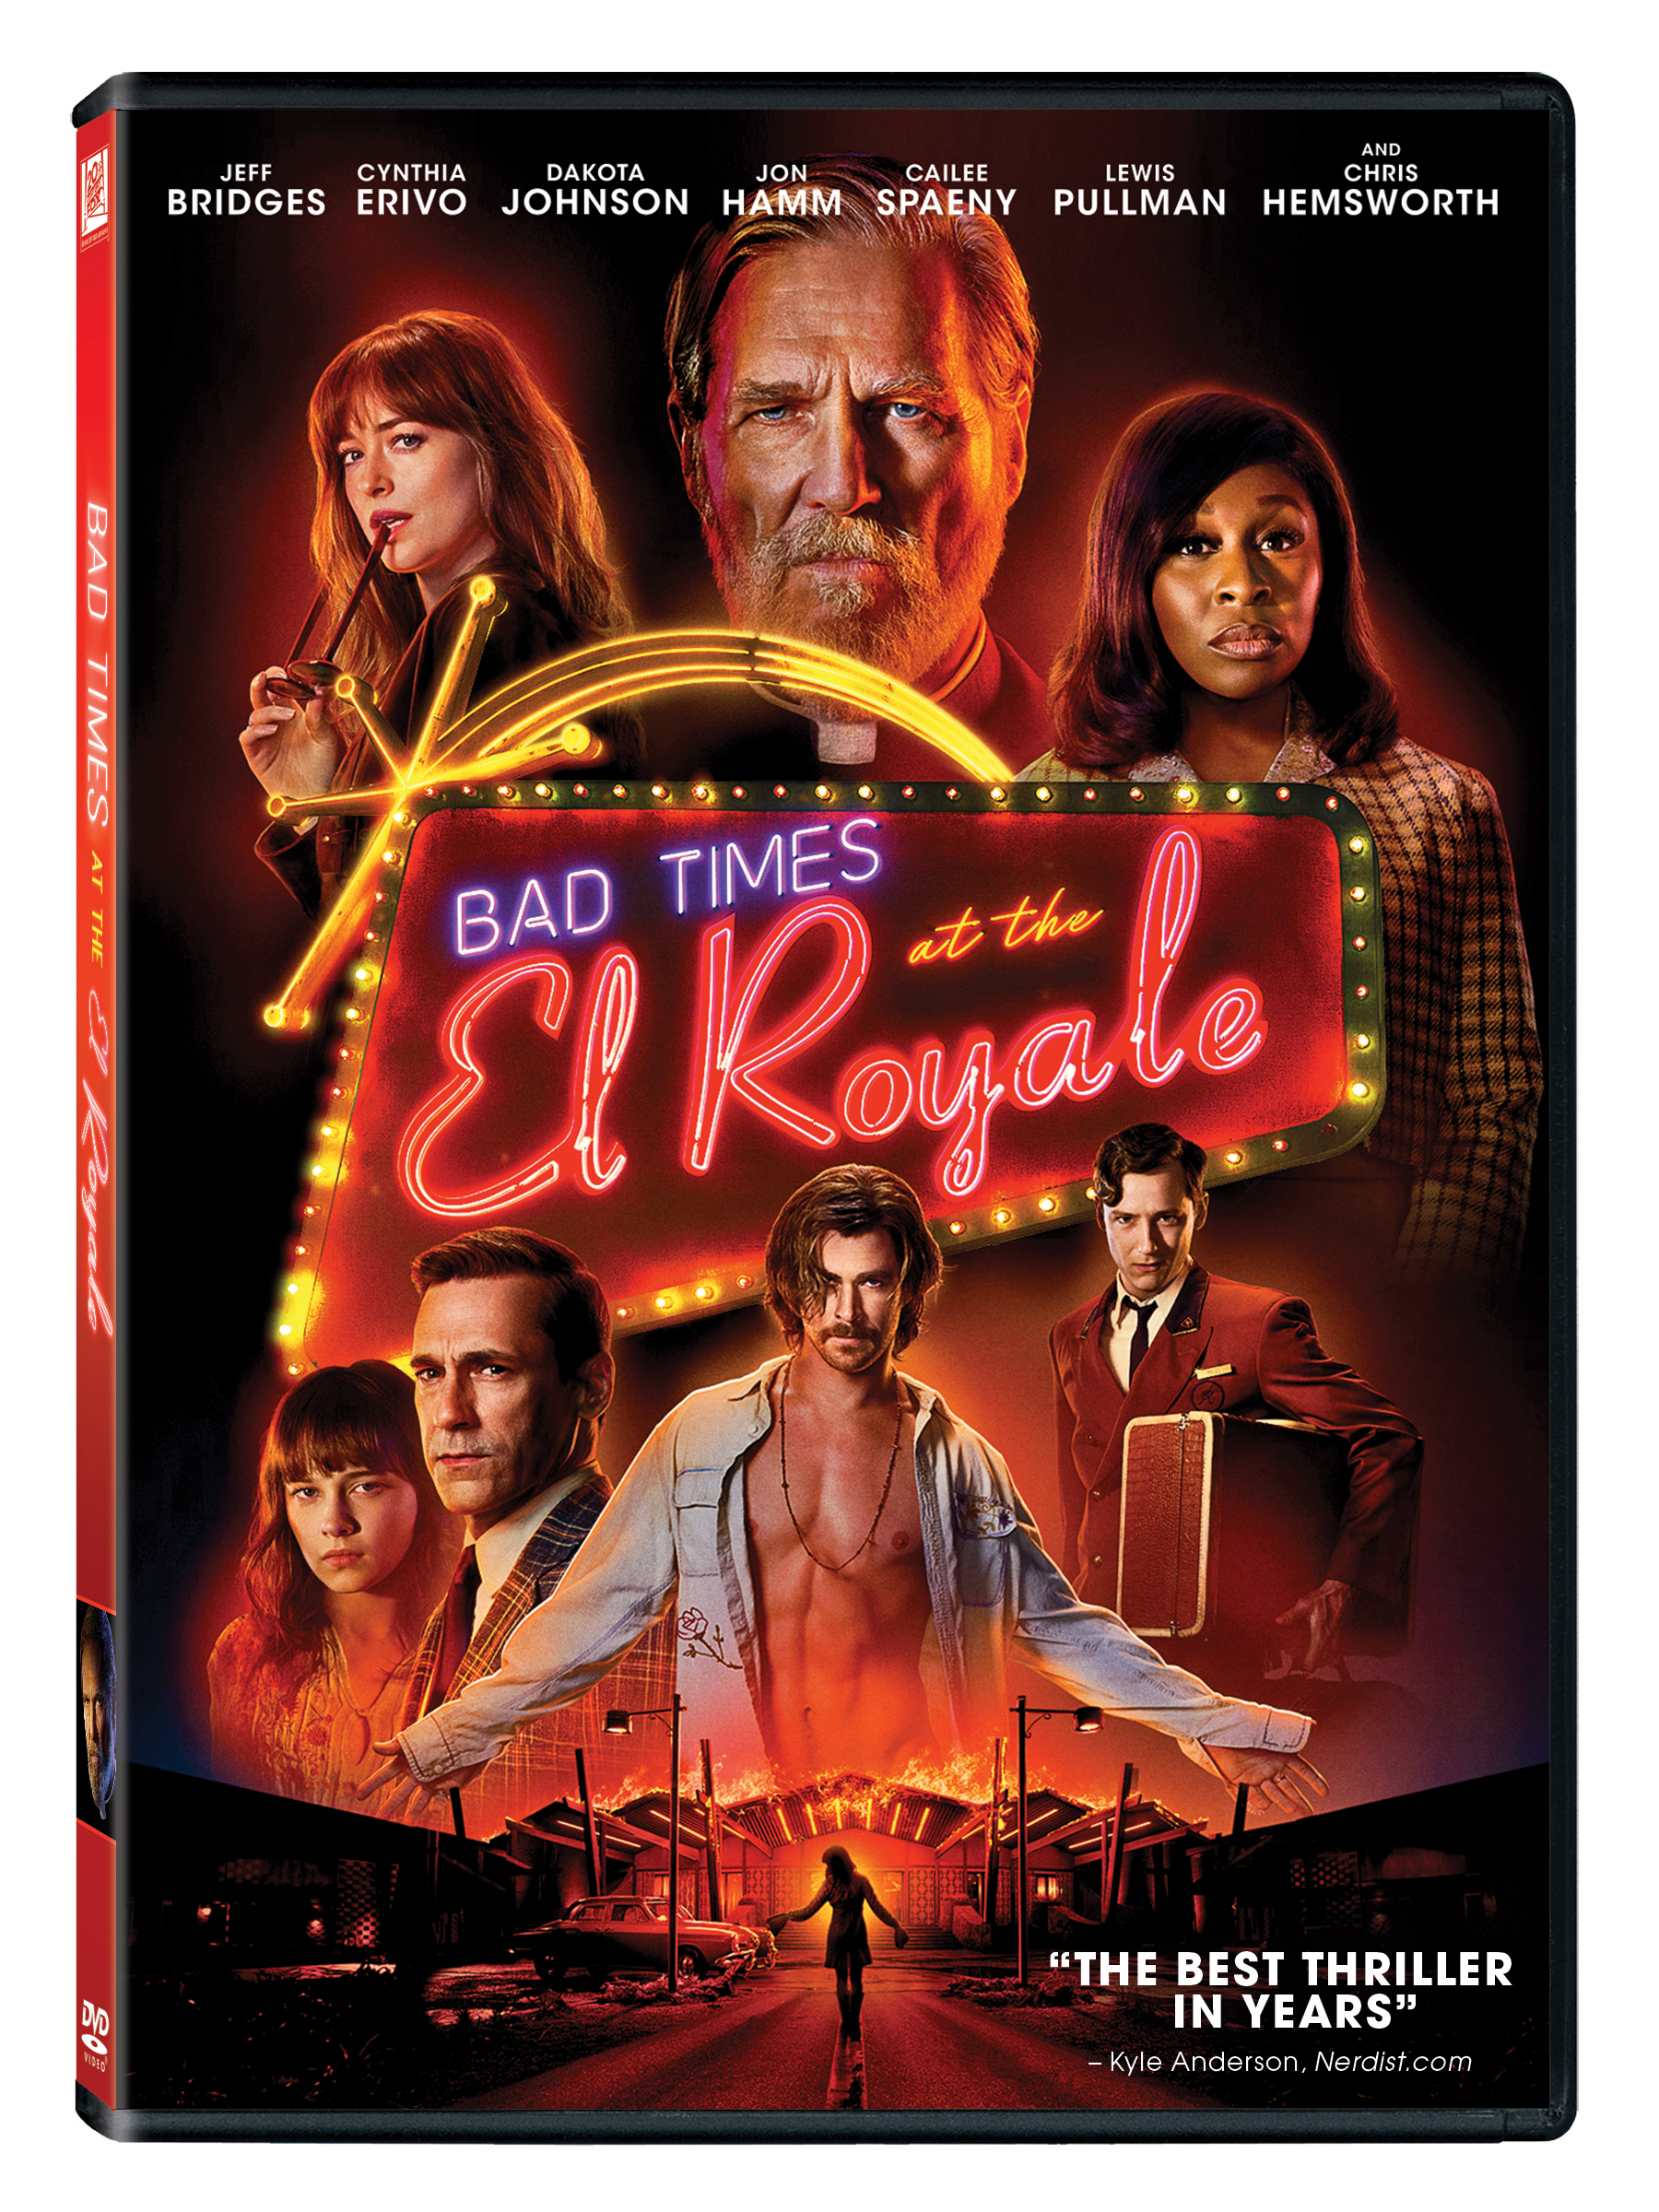 Bad Times at the El Royale (DVD) - image 2 of 2